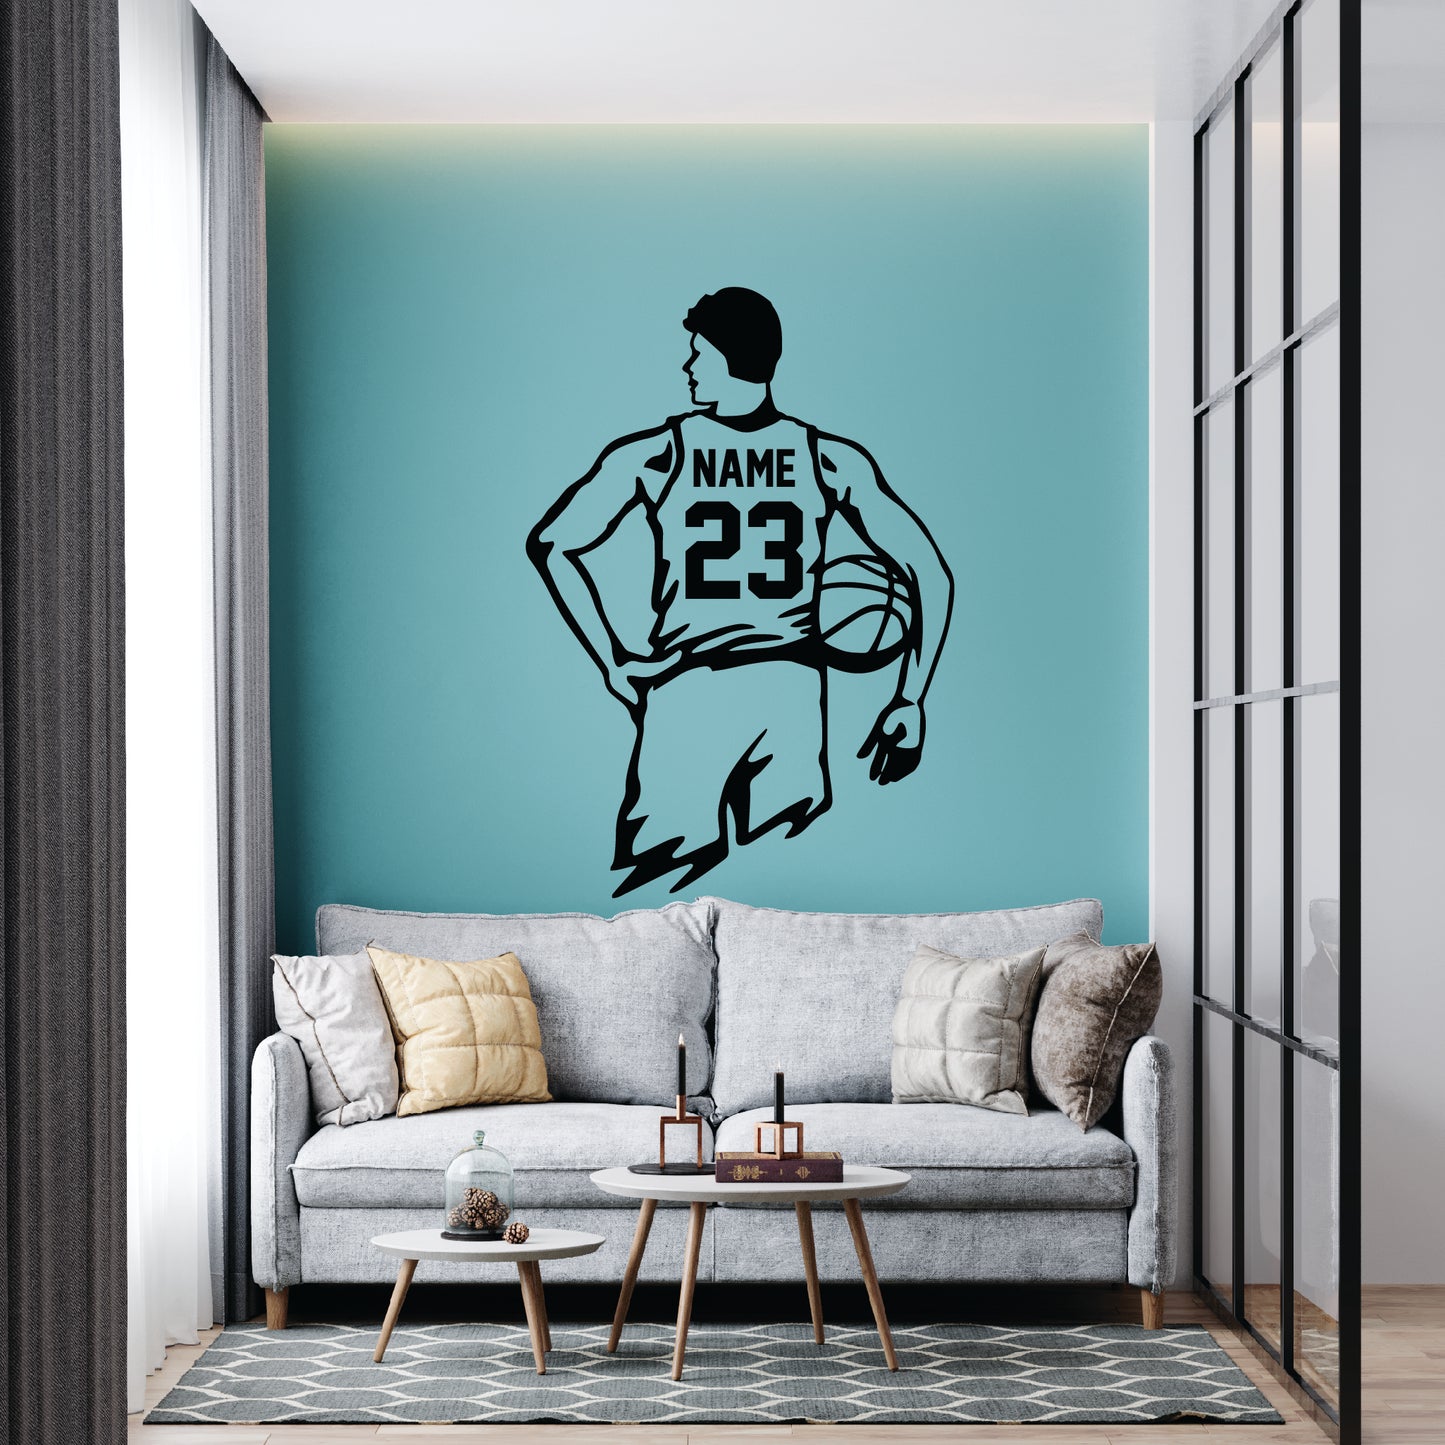 Basketball Wall Decals, sports Boys Wall Decals for room decor